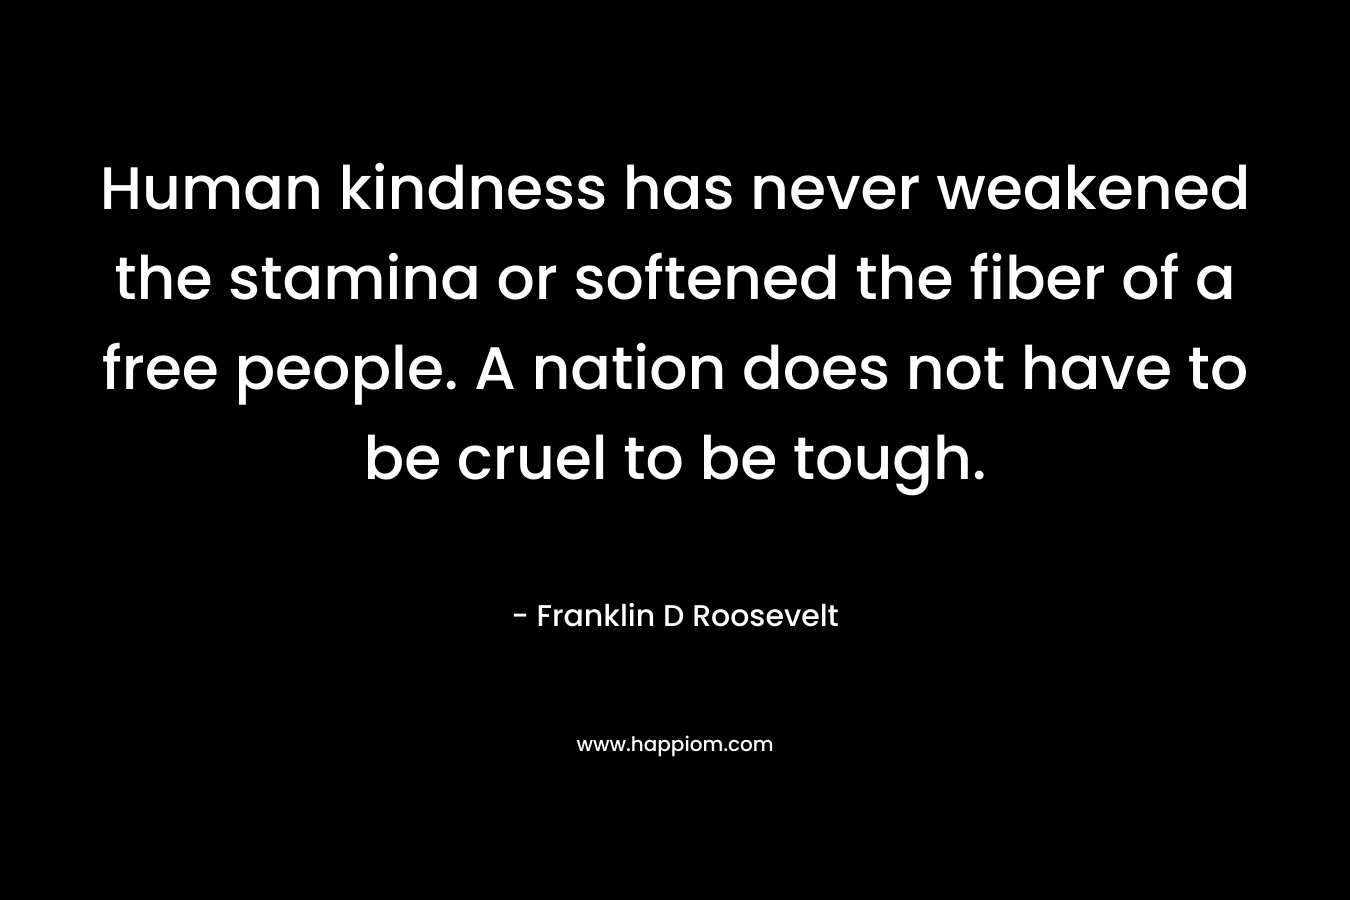 Human kindness has never weakened the stamina or softened the fiber of a free people. A nation does not have to be cruel to be tough. – Franklin D Roosevelt